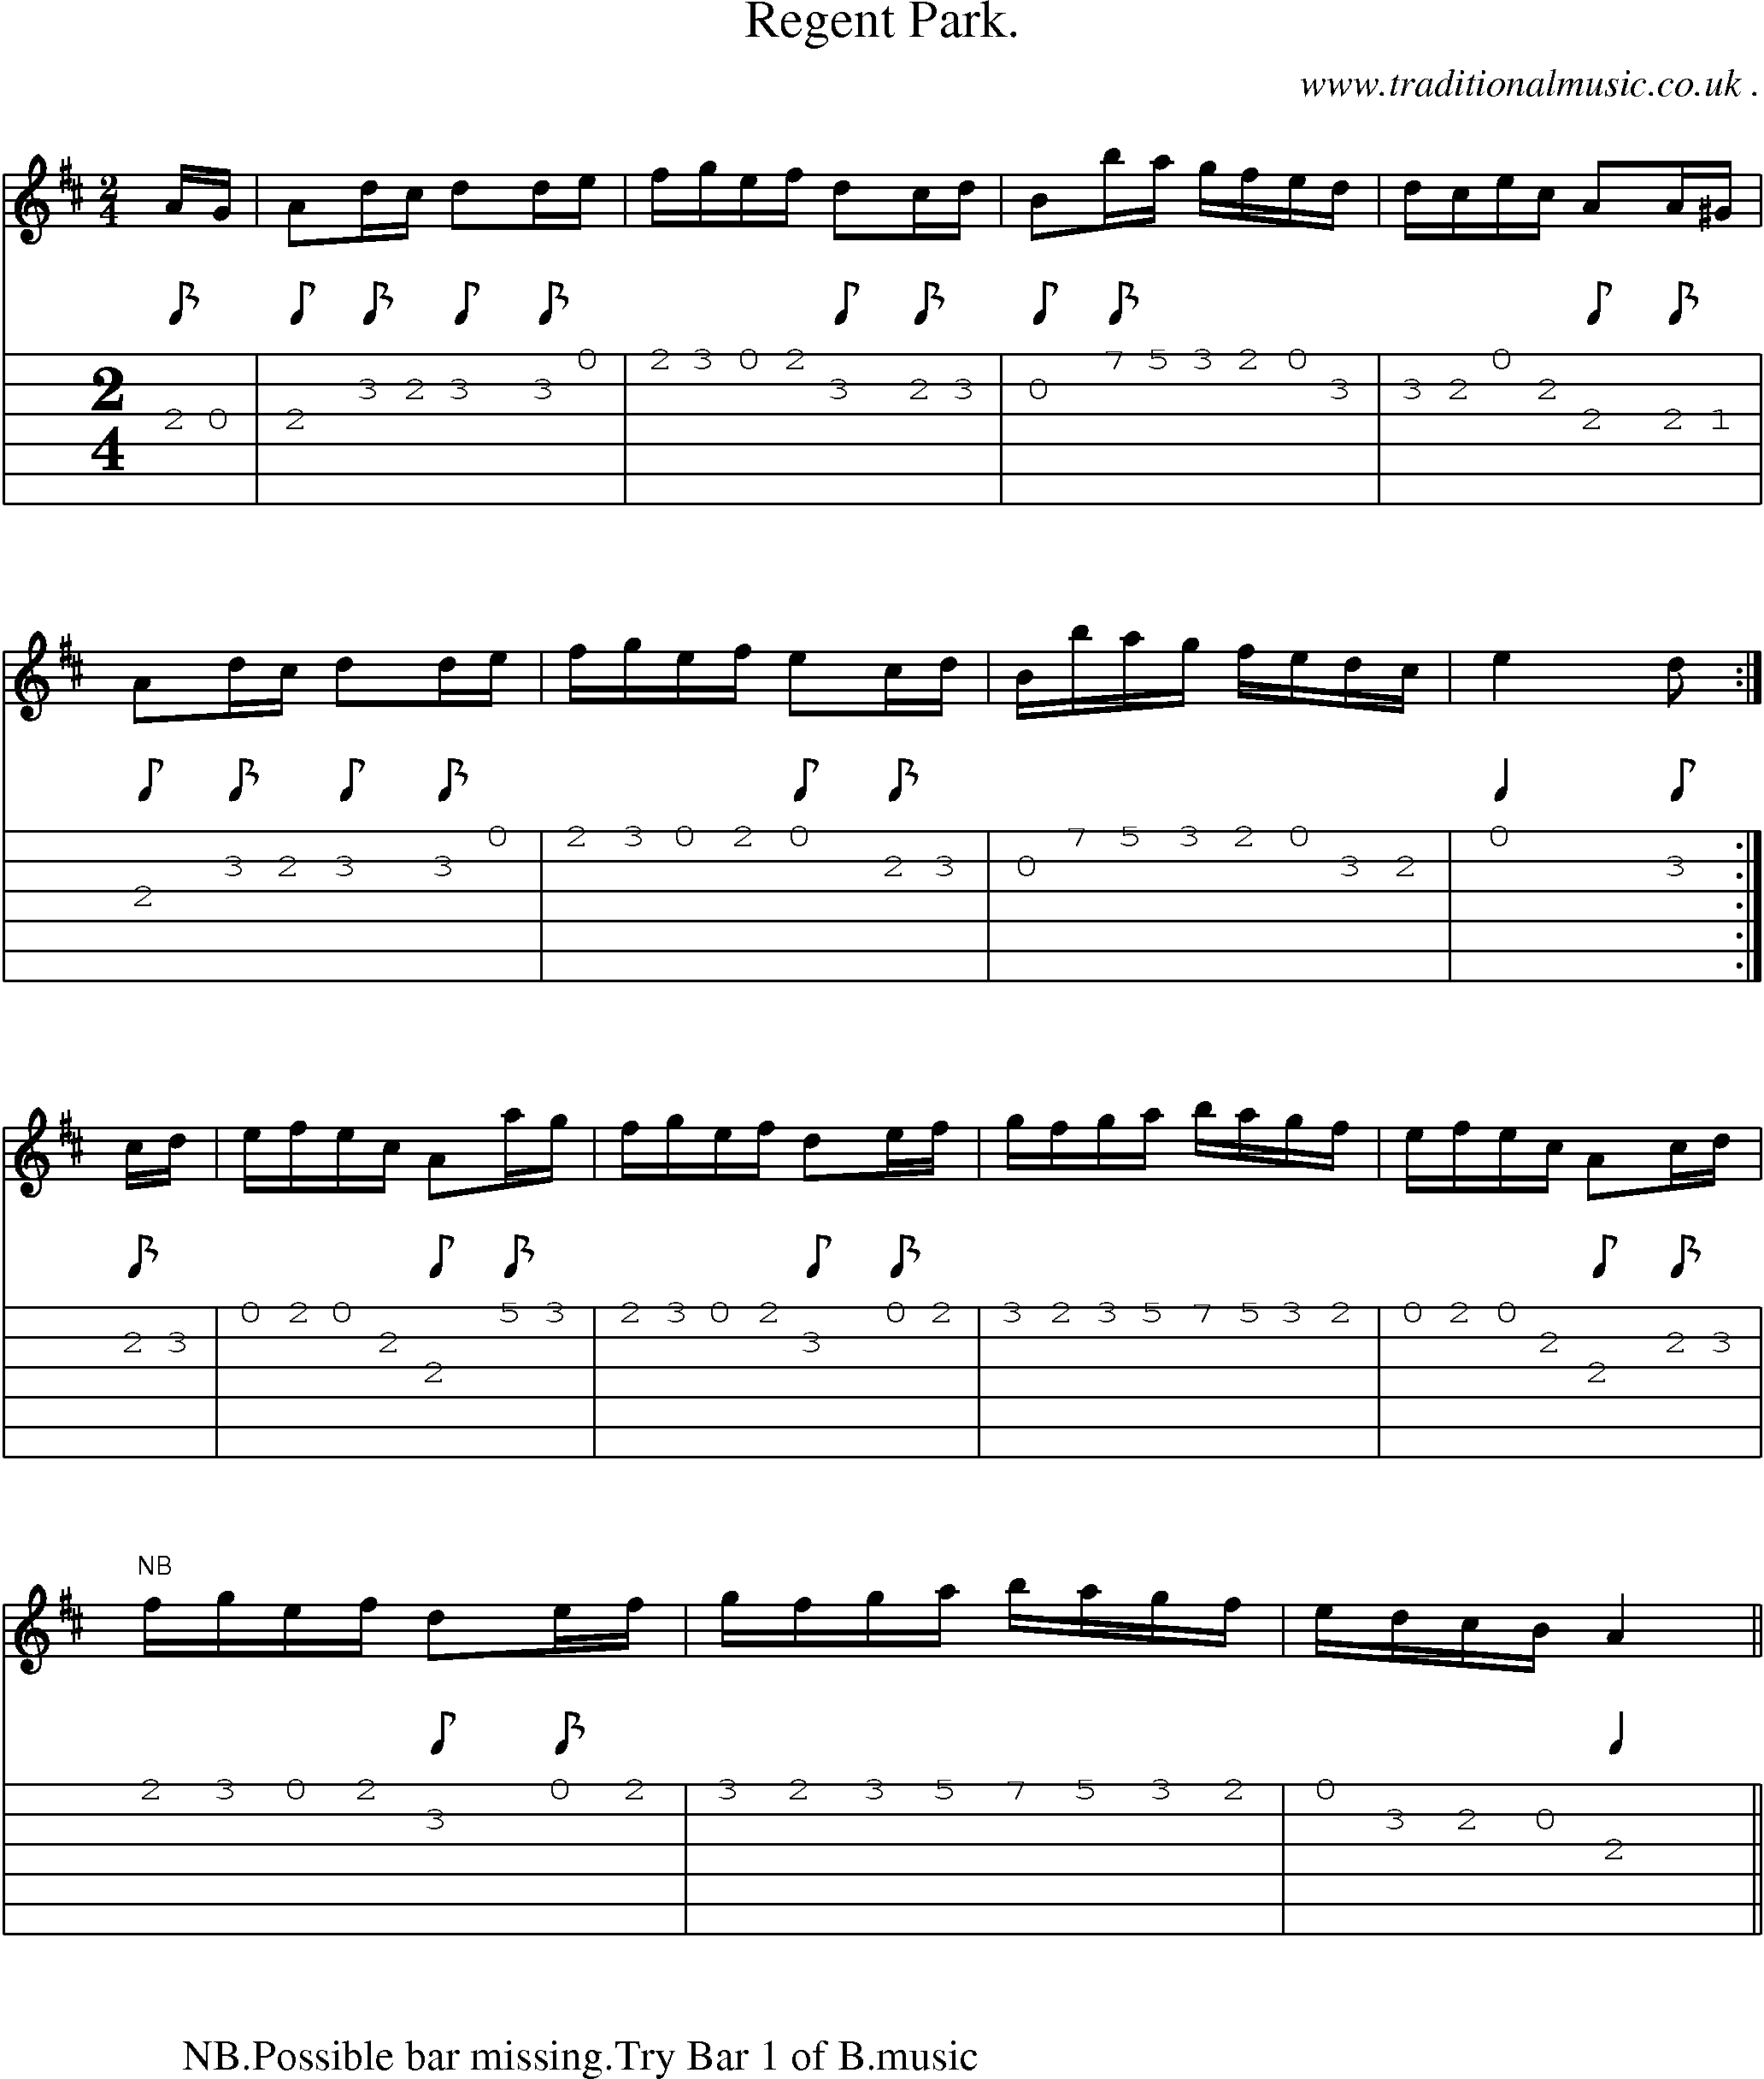 Sheet-Music and Guitar Tabs for Regent Park